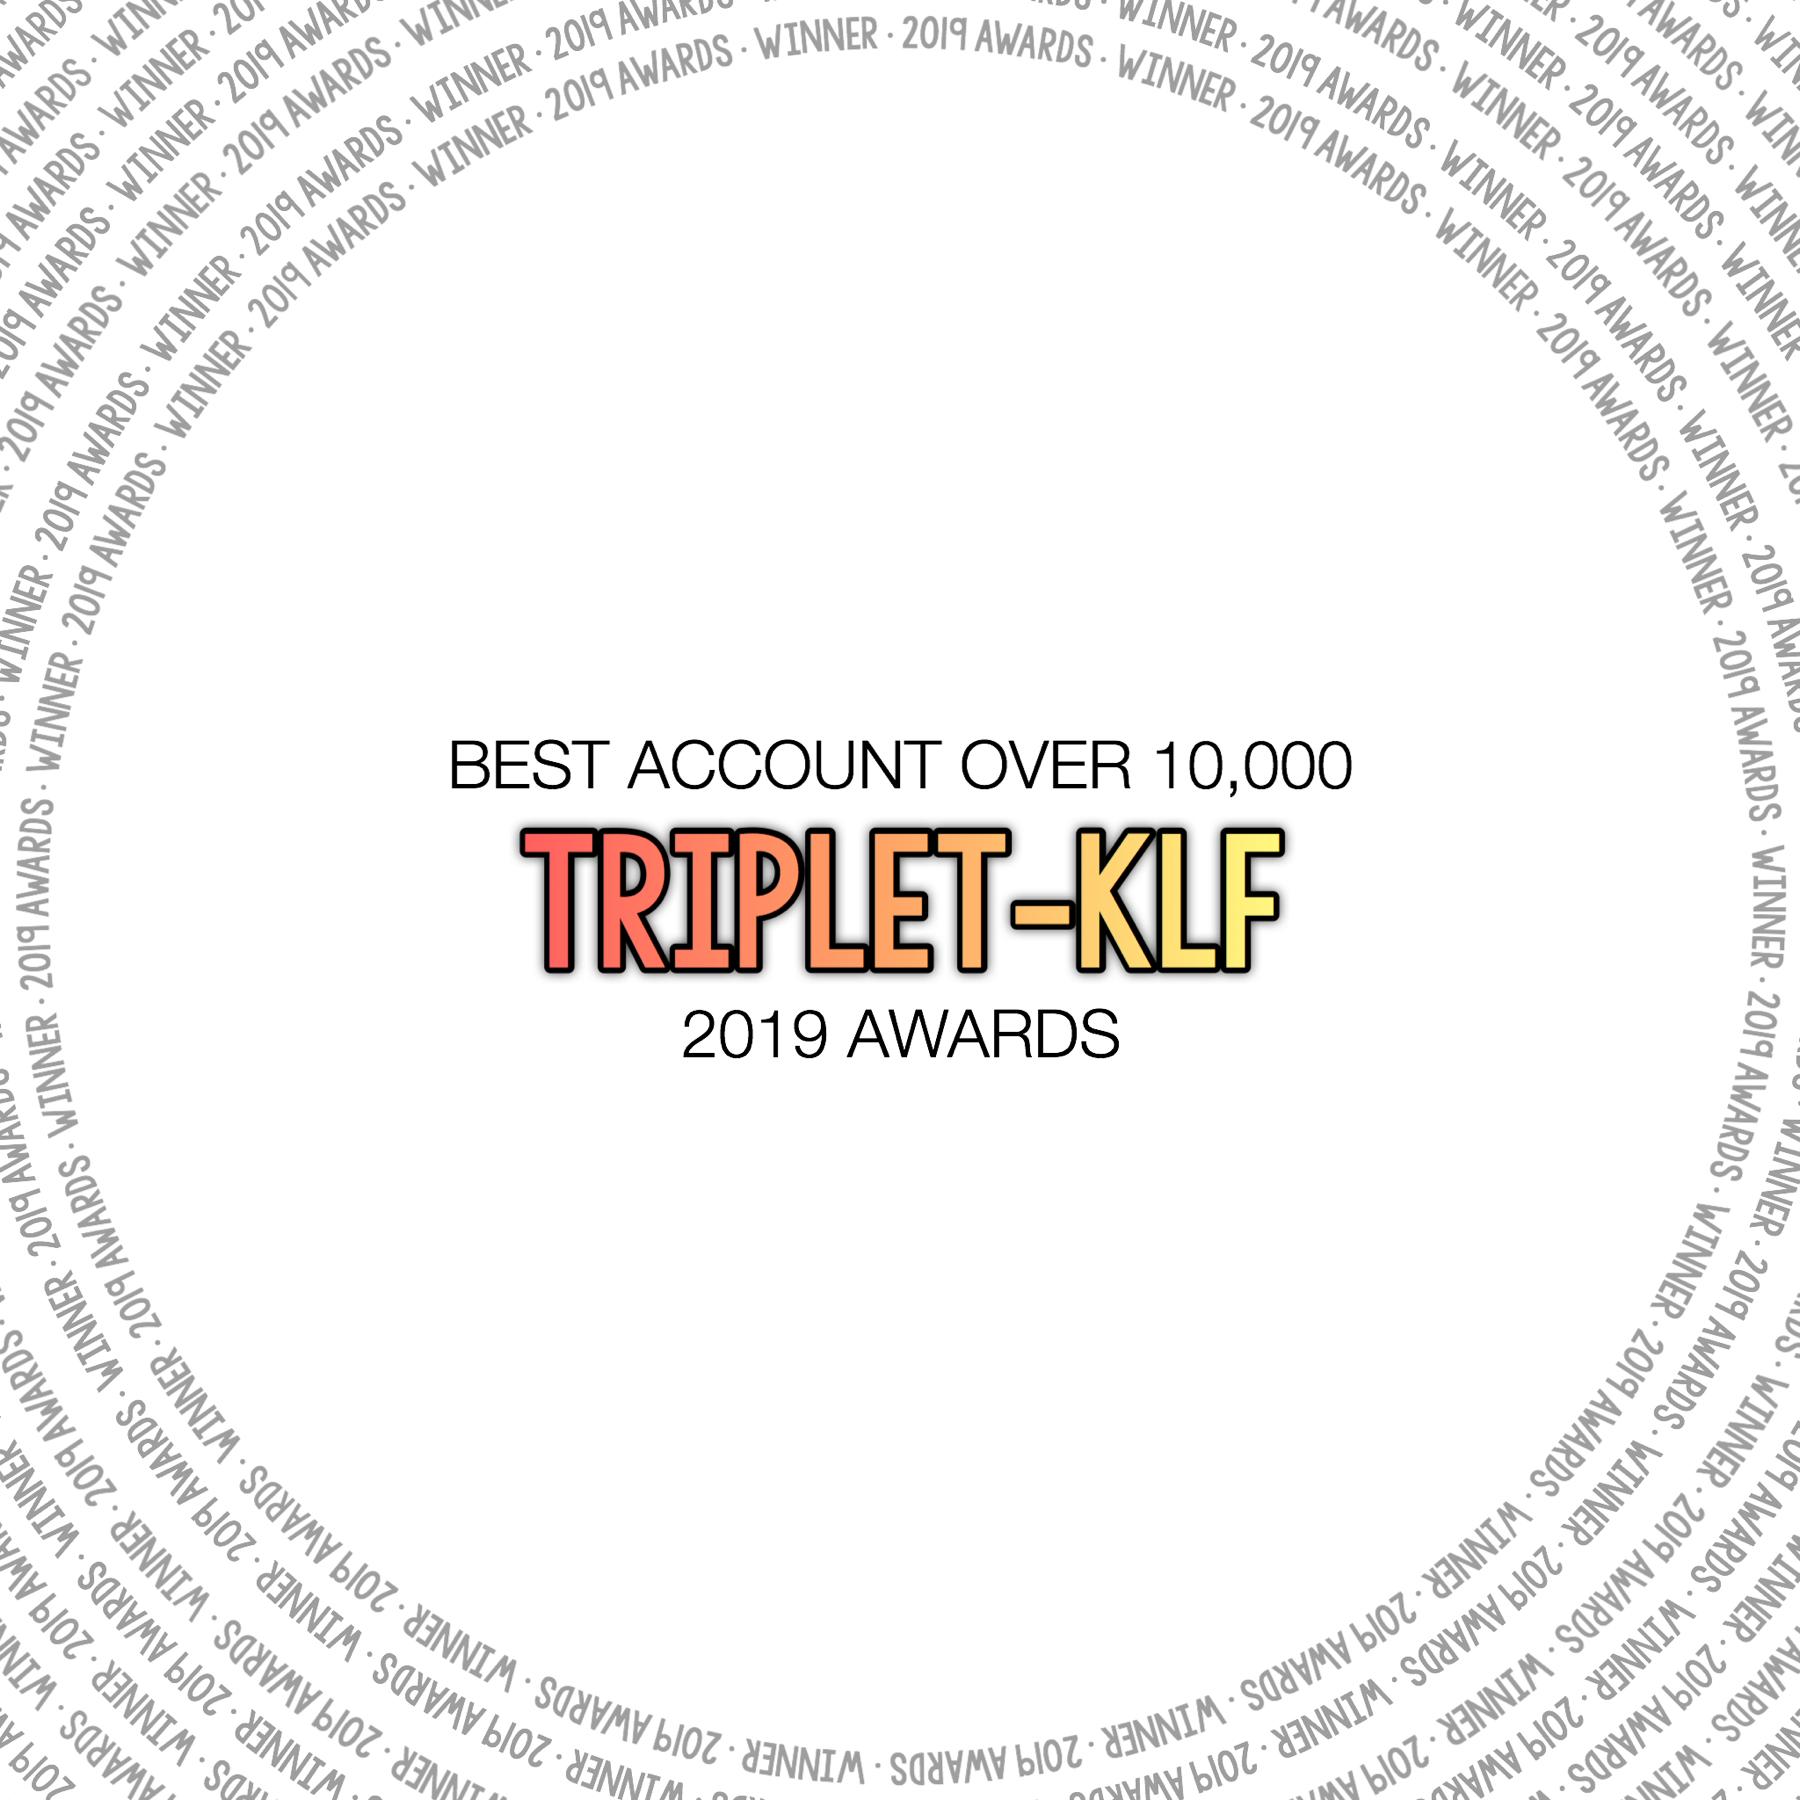 Congratulations @Triplet-klf!

The vote count will be in the remixes